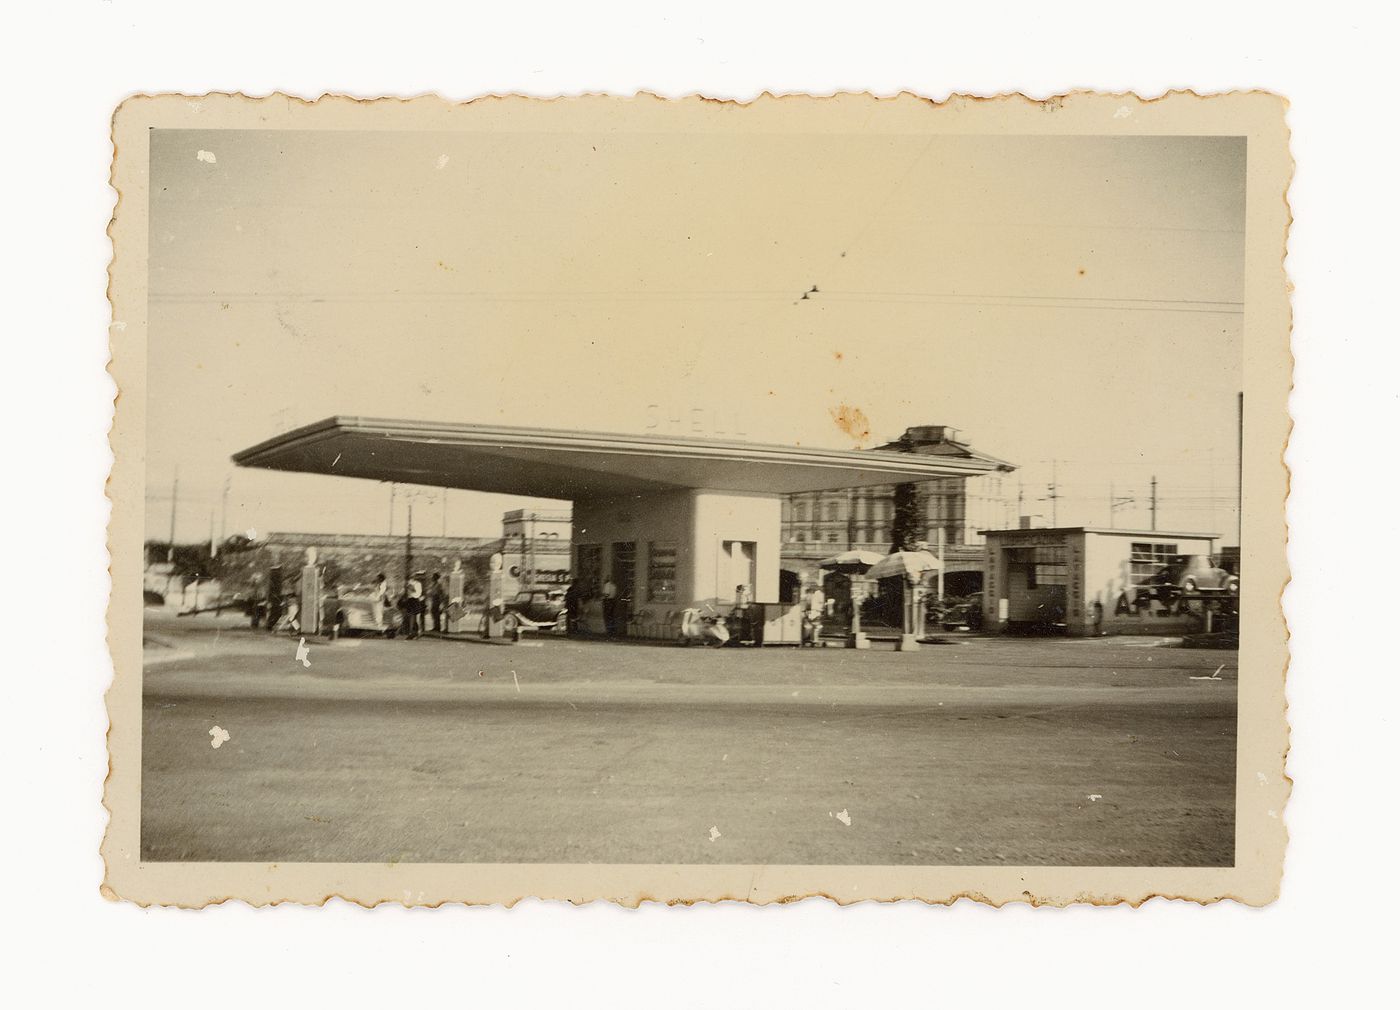 Photograph for a Petrol Station in Verona, Italy